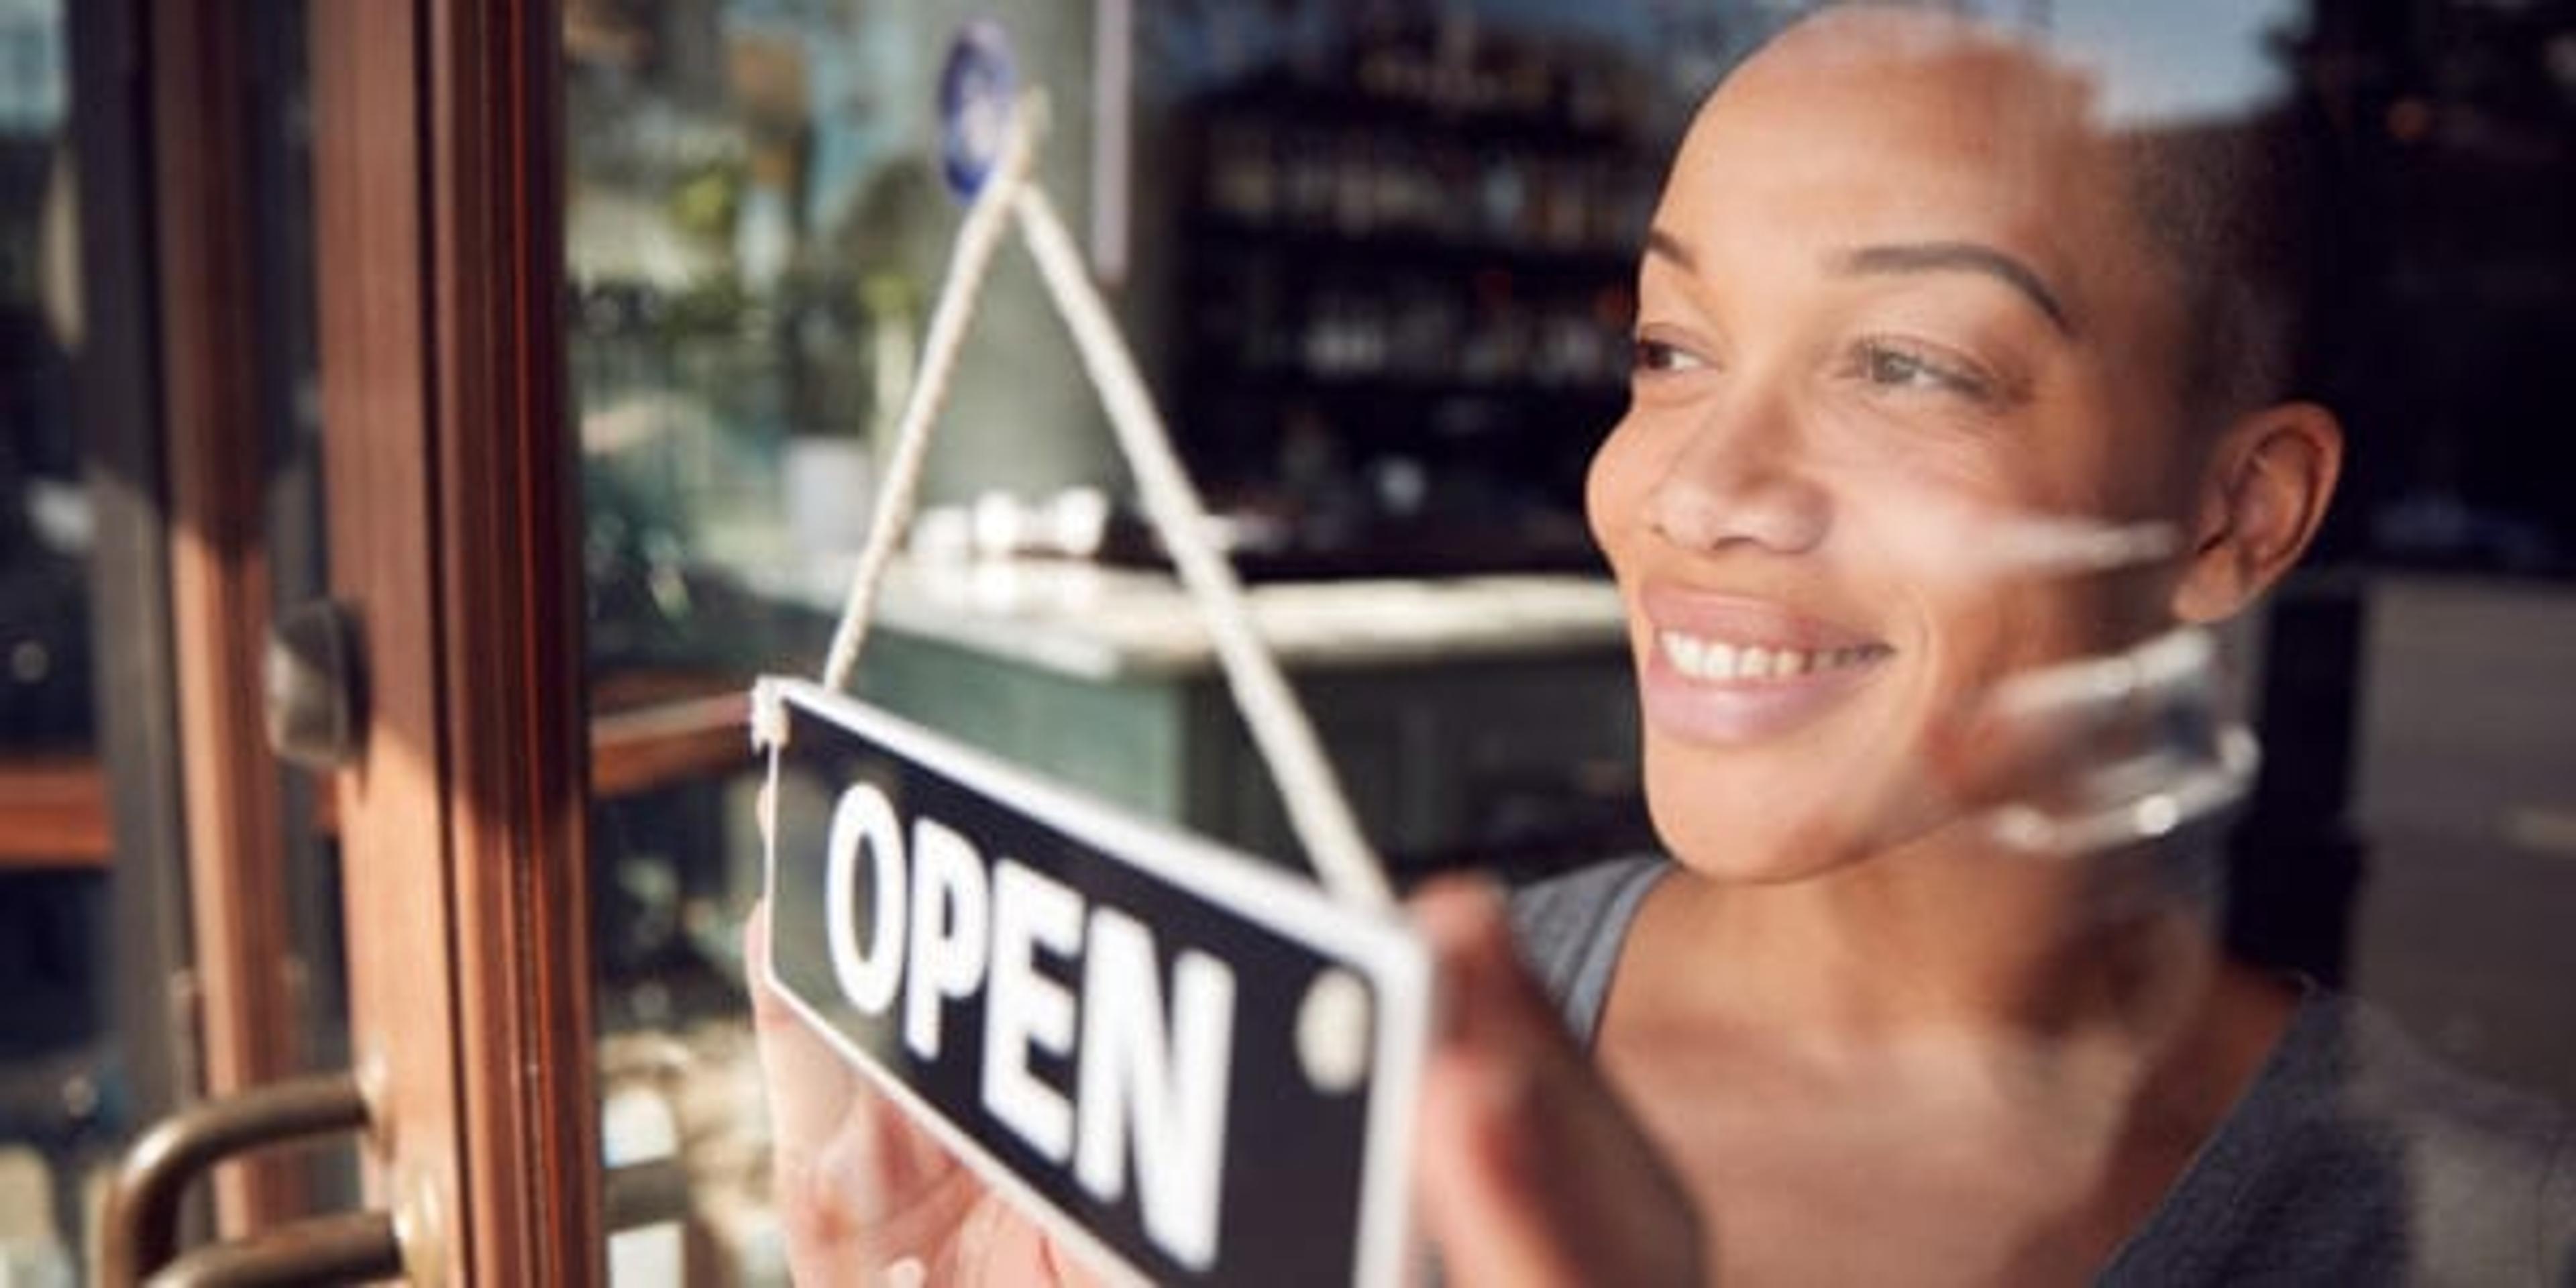 Black female business owner puts an open sign in the window